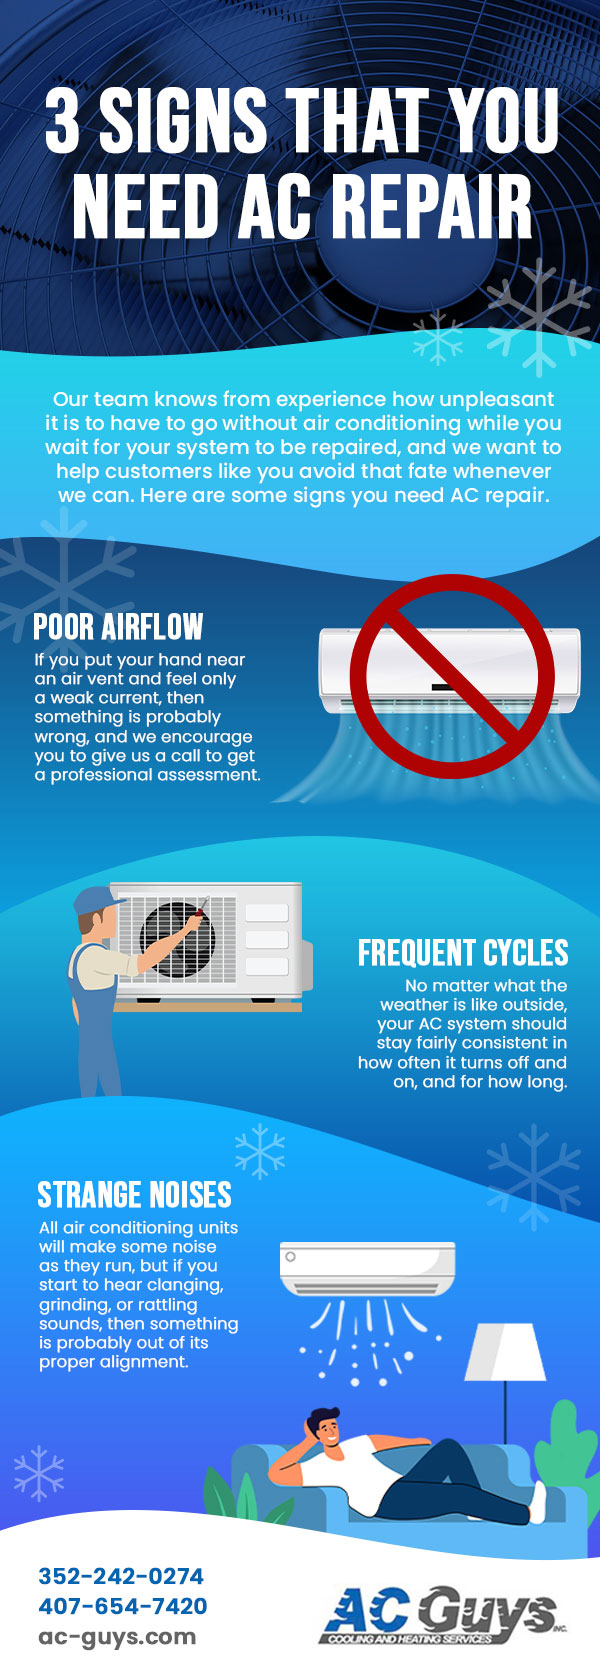 3 Signs That You Need AC Repair